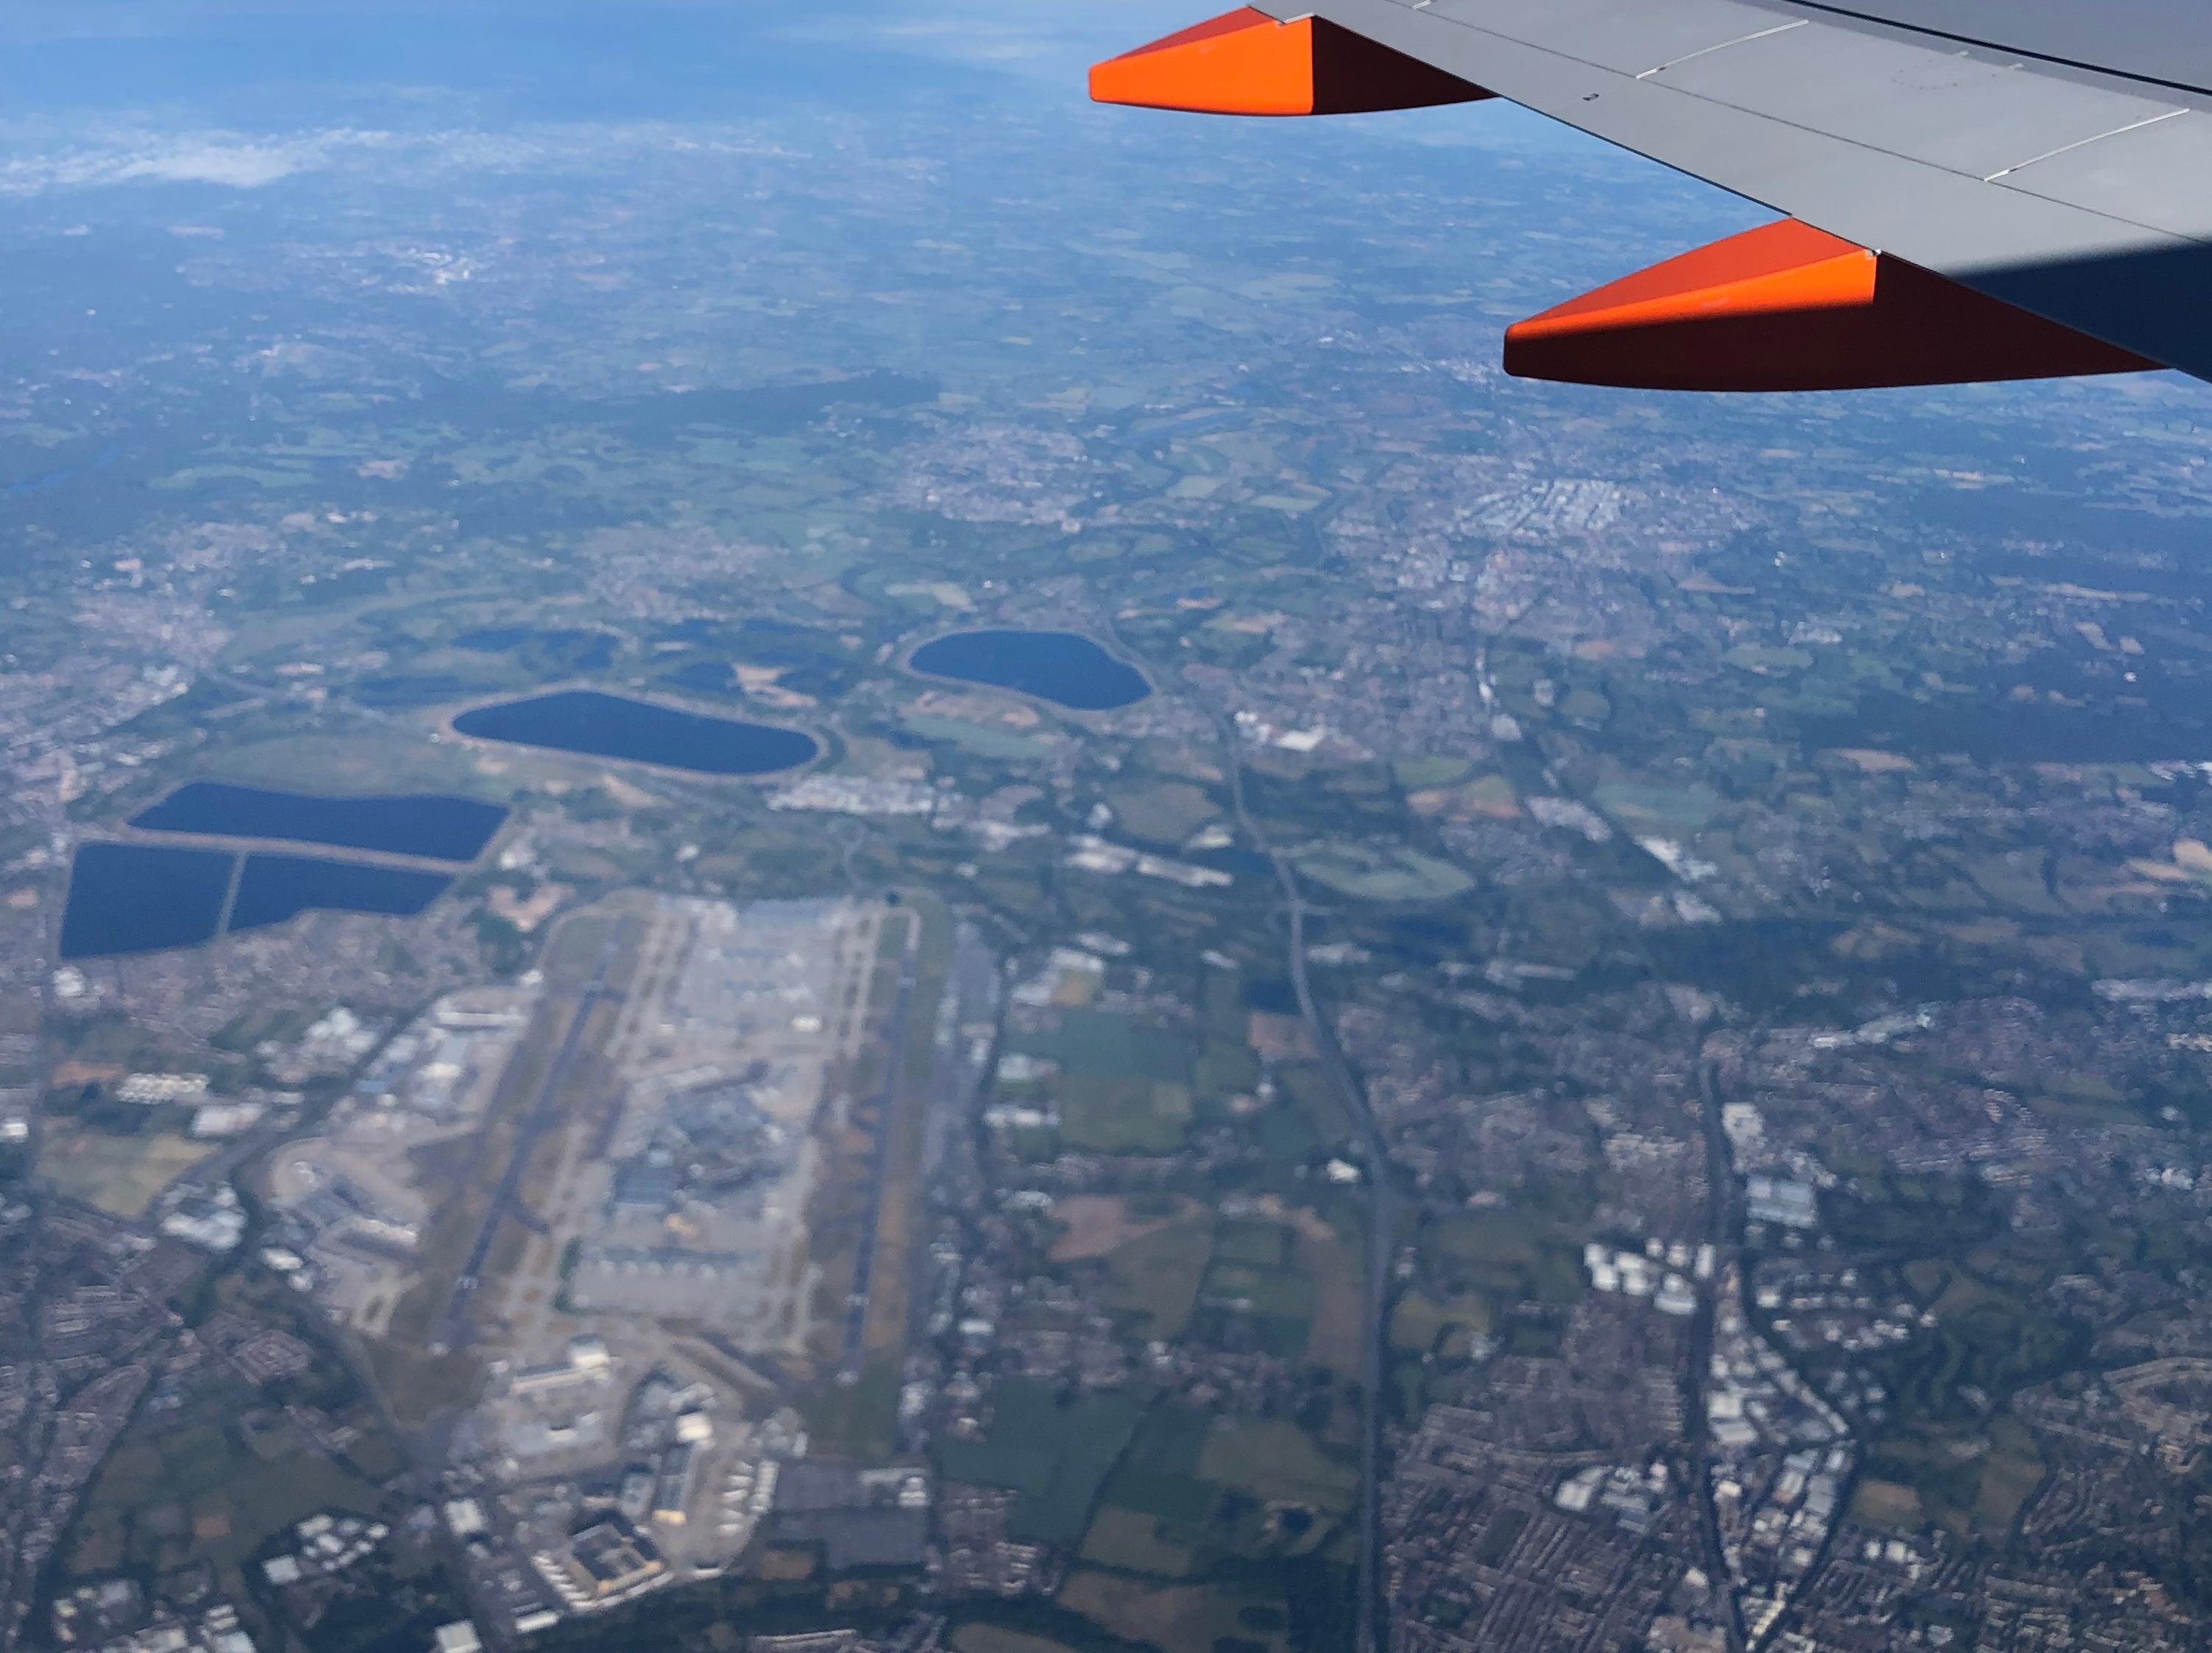 Quiet zone: Heathrow airport, west of London, seen from an easyJet plane